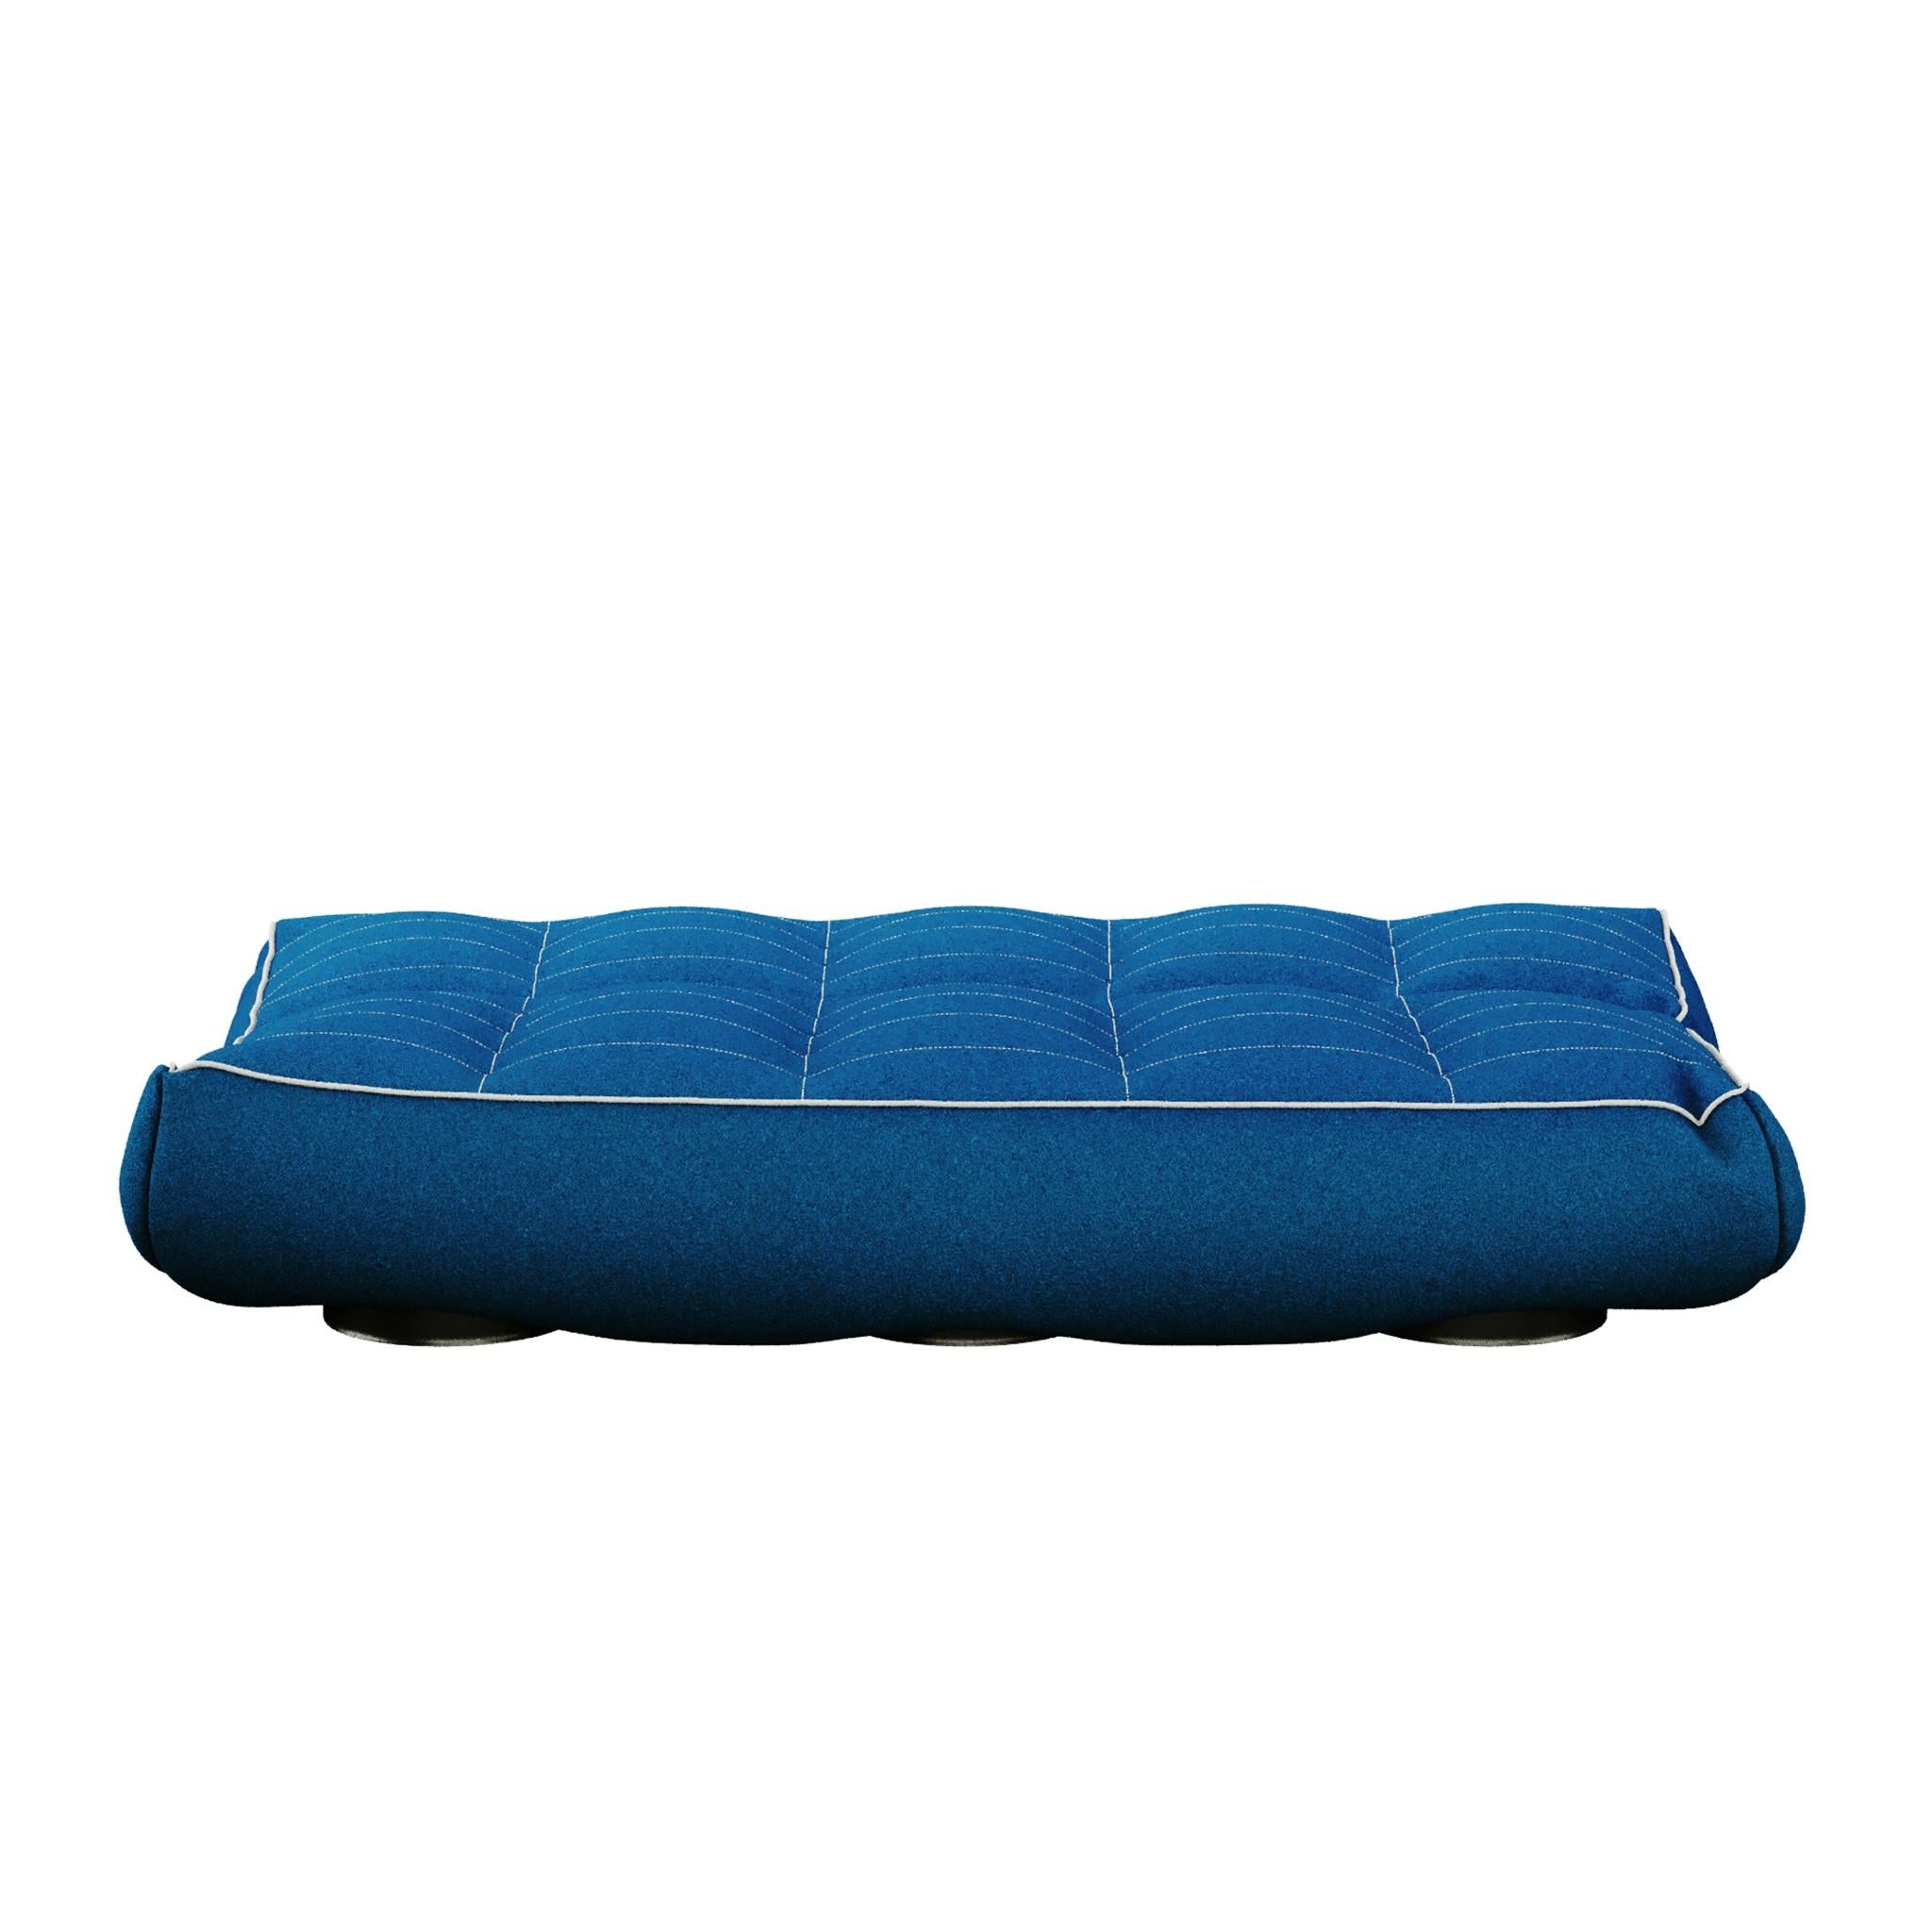 Fabric Modern Outdoor Sofa Folding Daybed Upholstered Blue Bouclé White Details For Sale